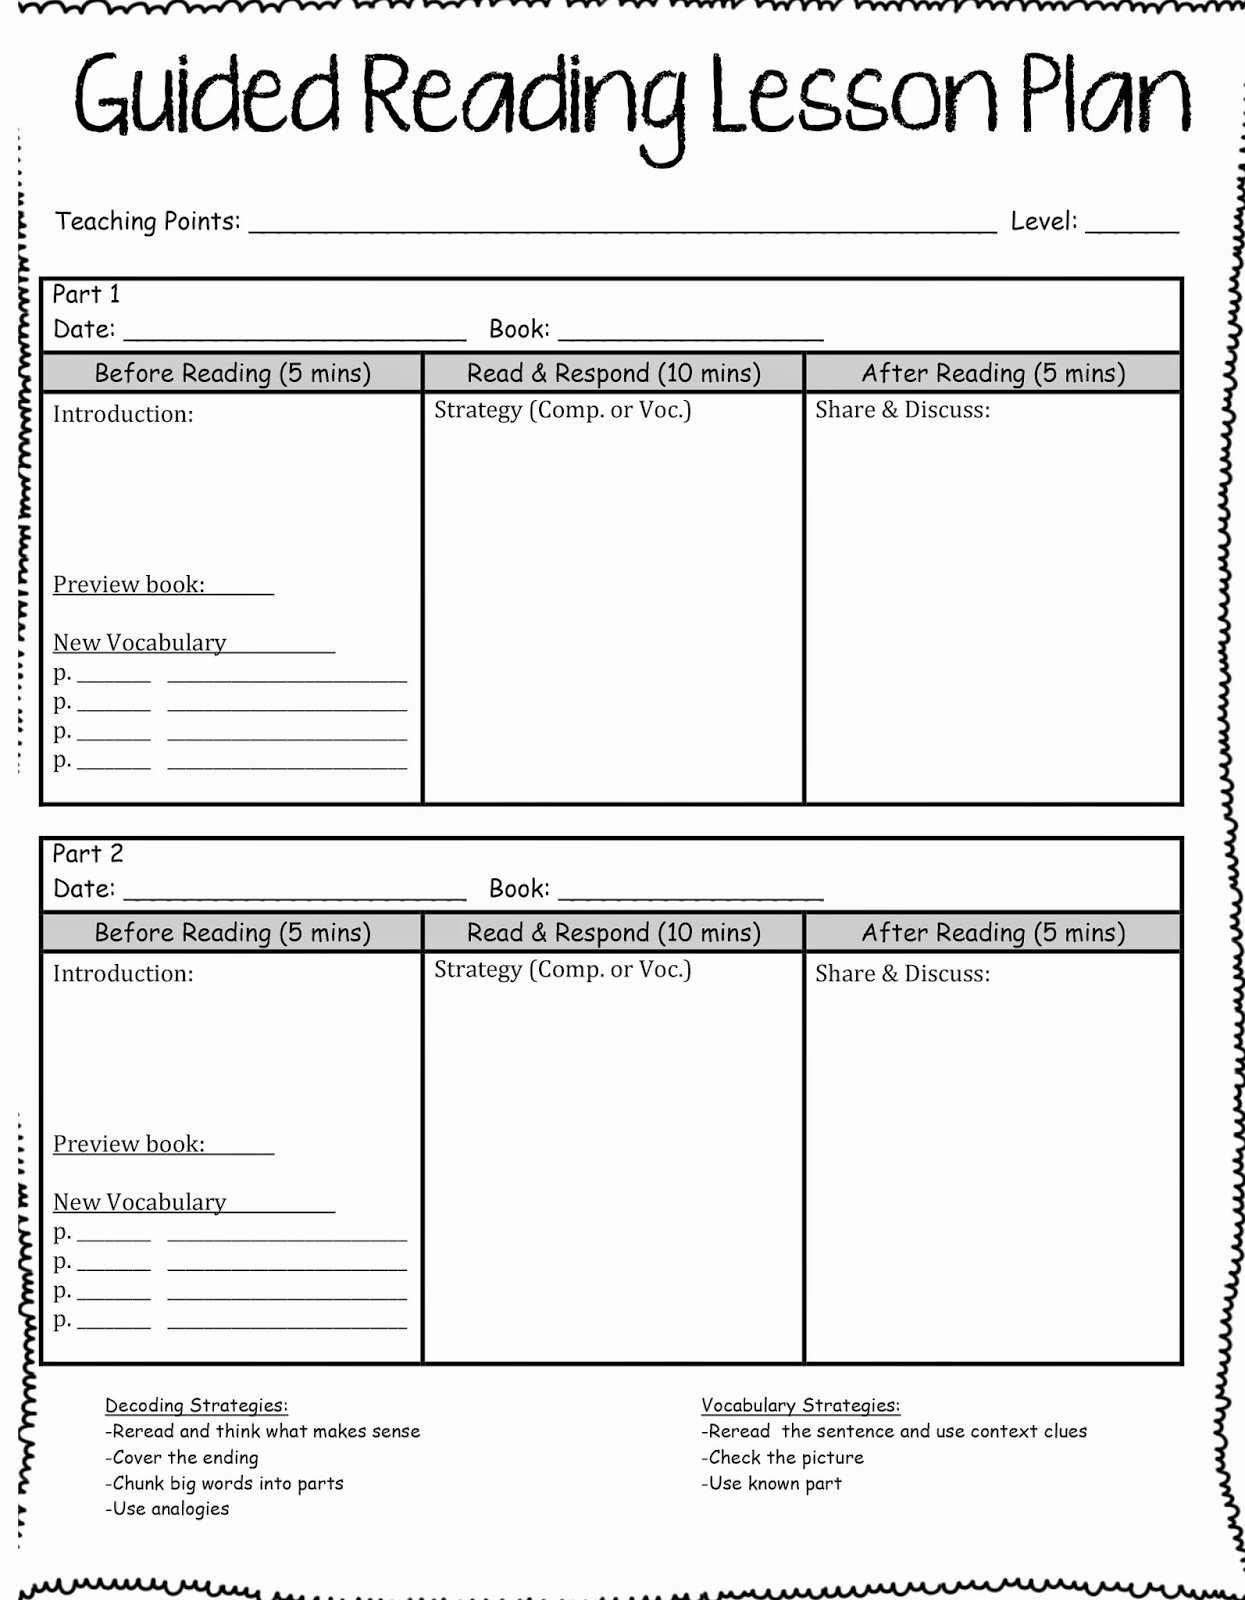 Guided Reading Template Pdf New Guided Reading Lesson Plan Template